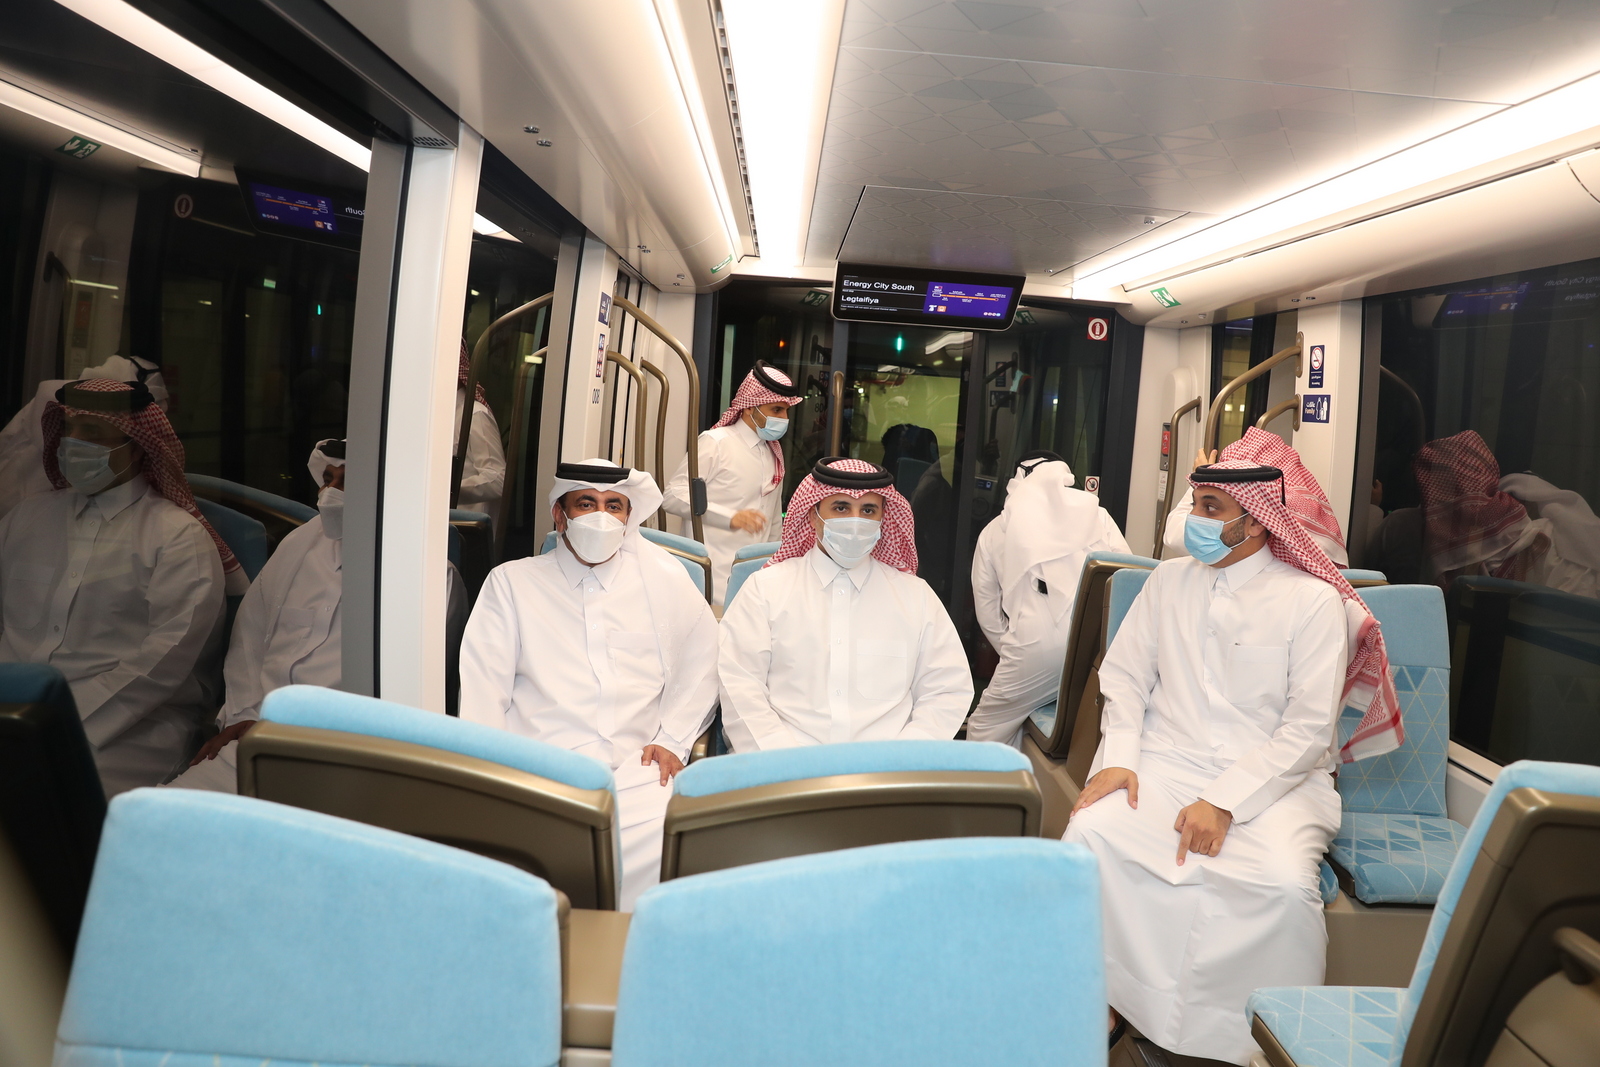 Minister of Transport Affirms Ministry's Plans to Provide Sustainable, Multimodal Public Transport